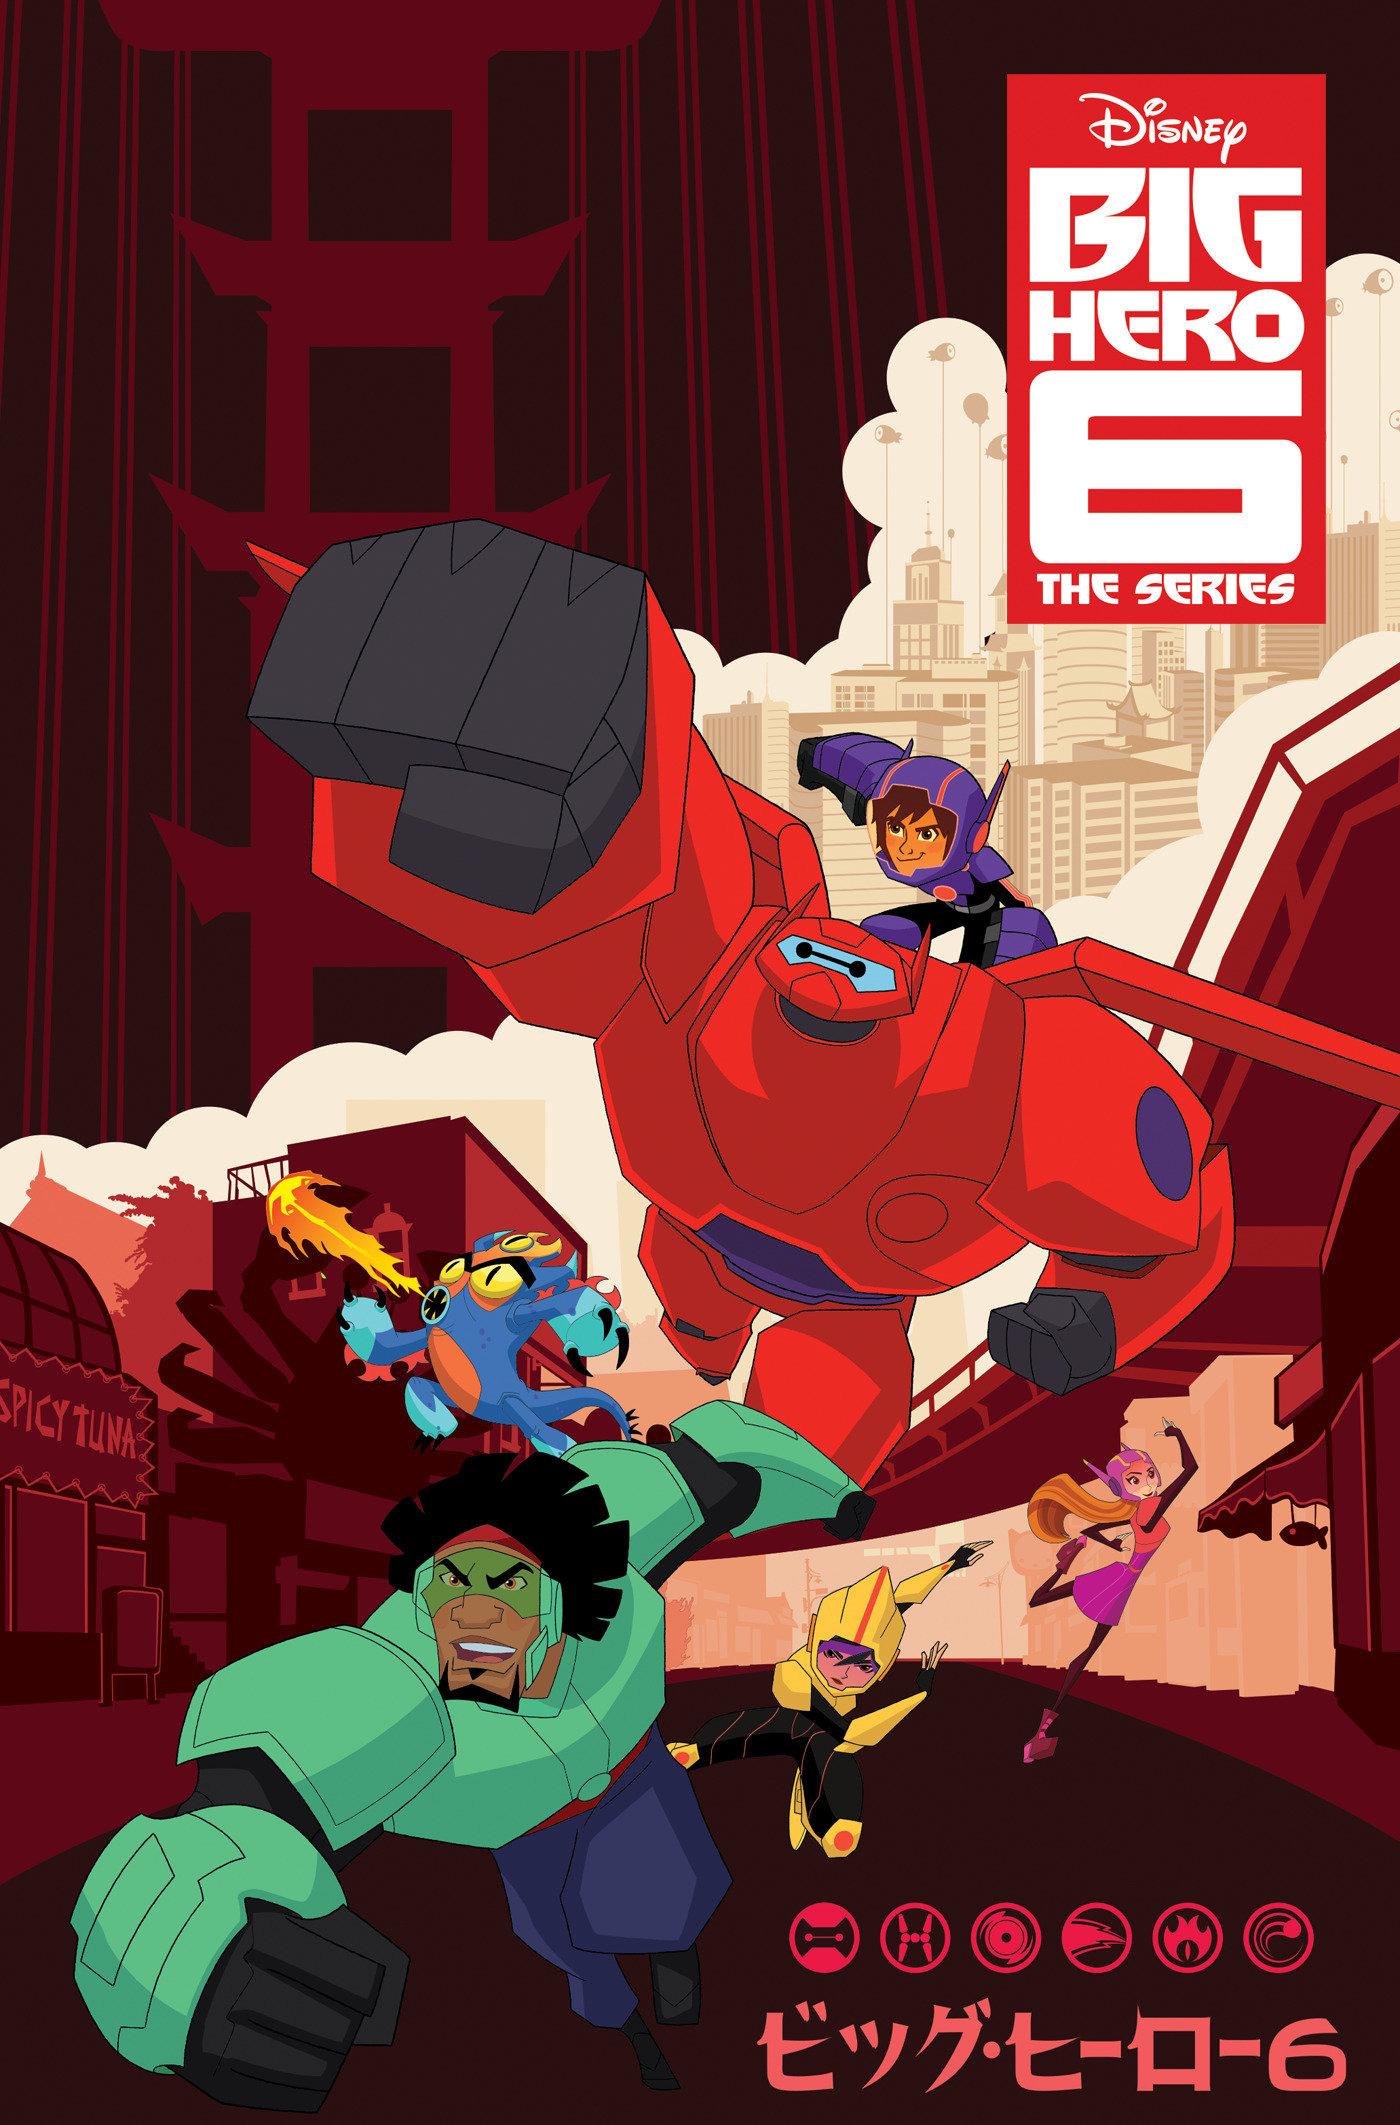 Mega Sized TV Poster Image for Big Hero 6 The Series (#3 of 3)